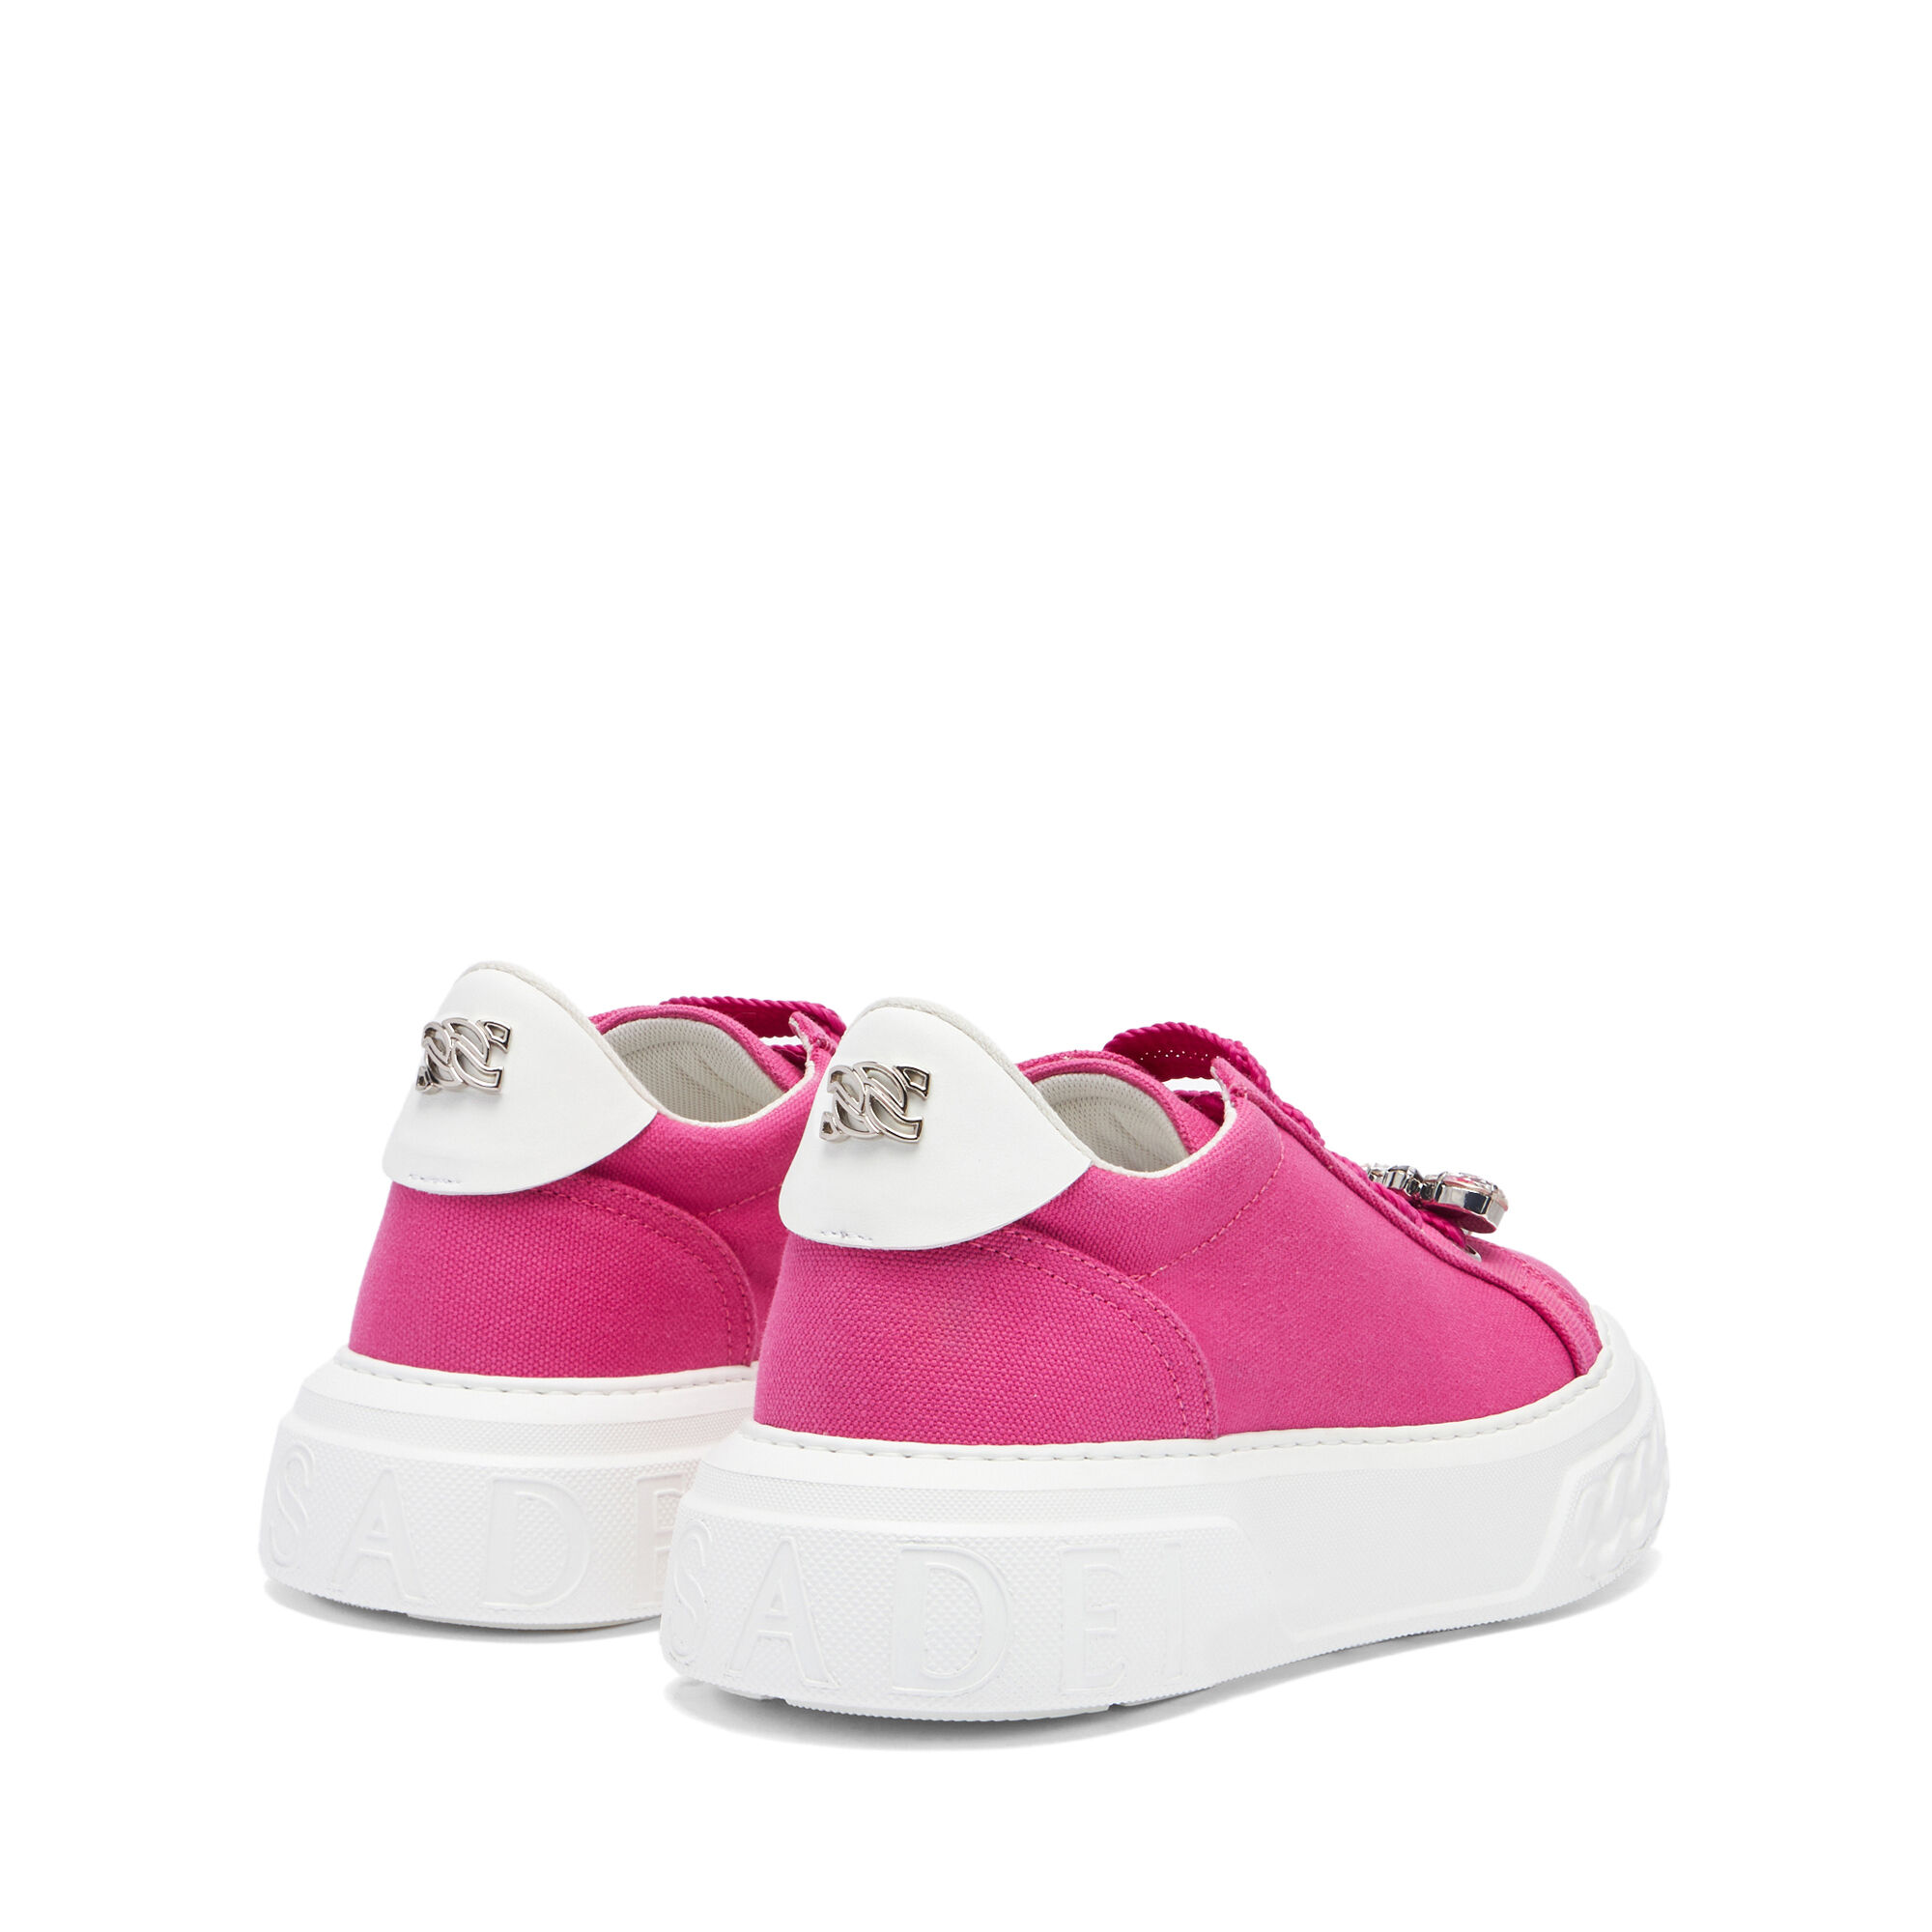 Off Road Queen Bee Sneakers Sneakers in Fuchsia and White für 